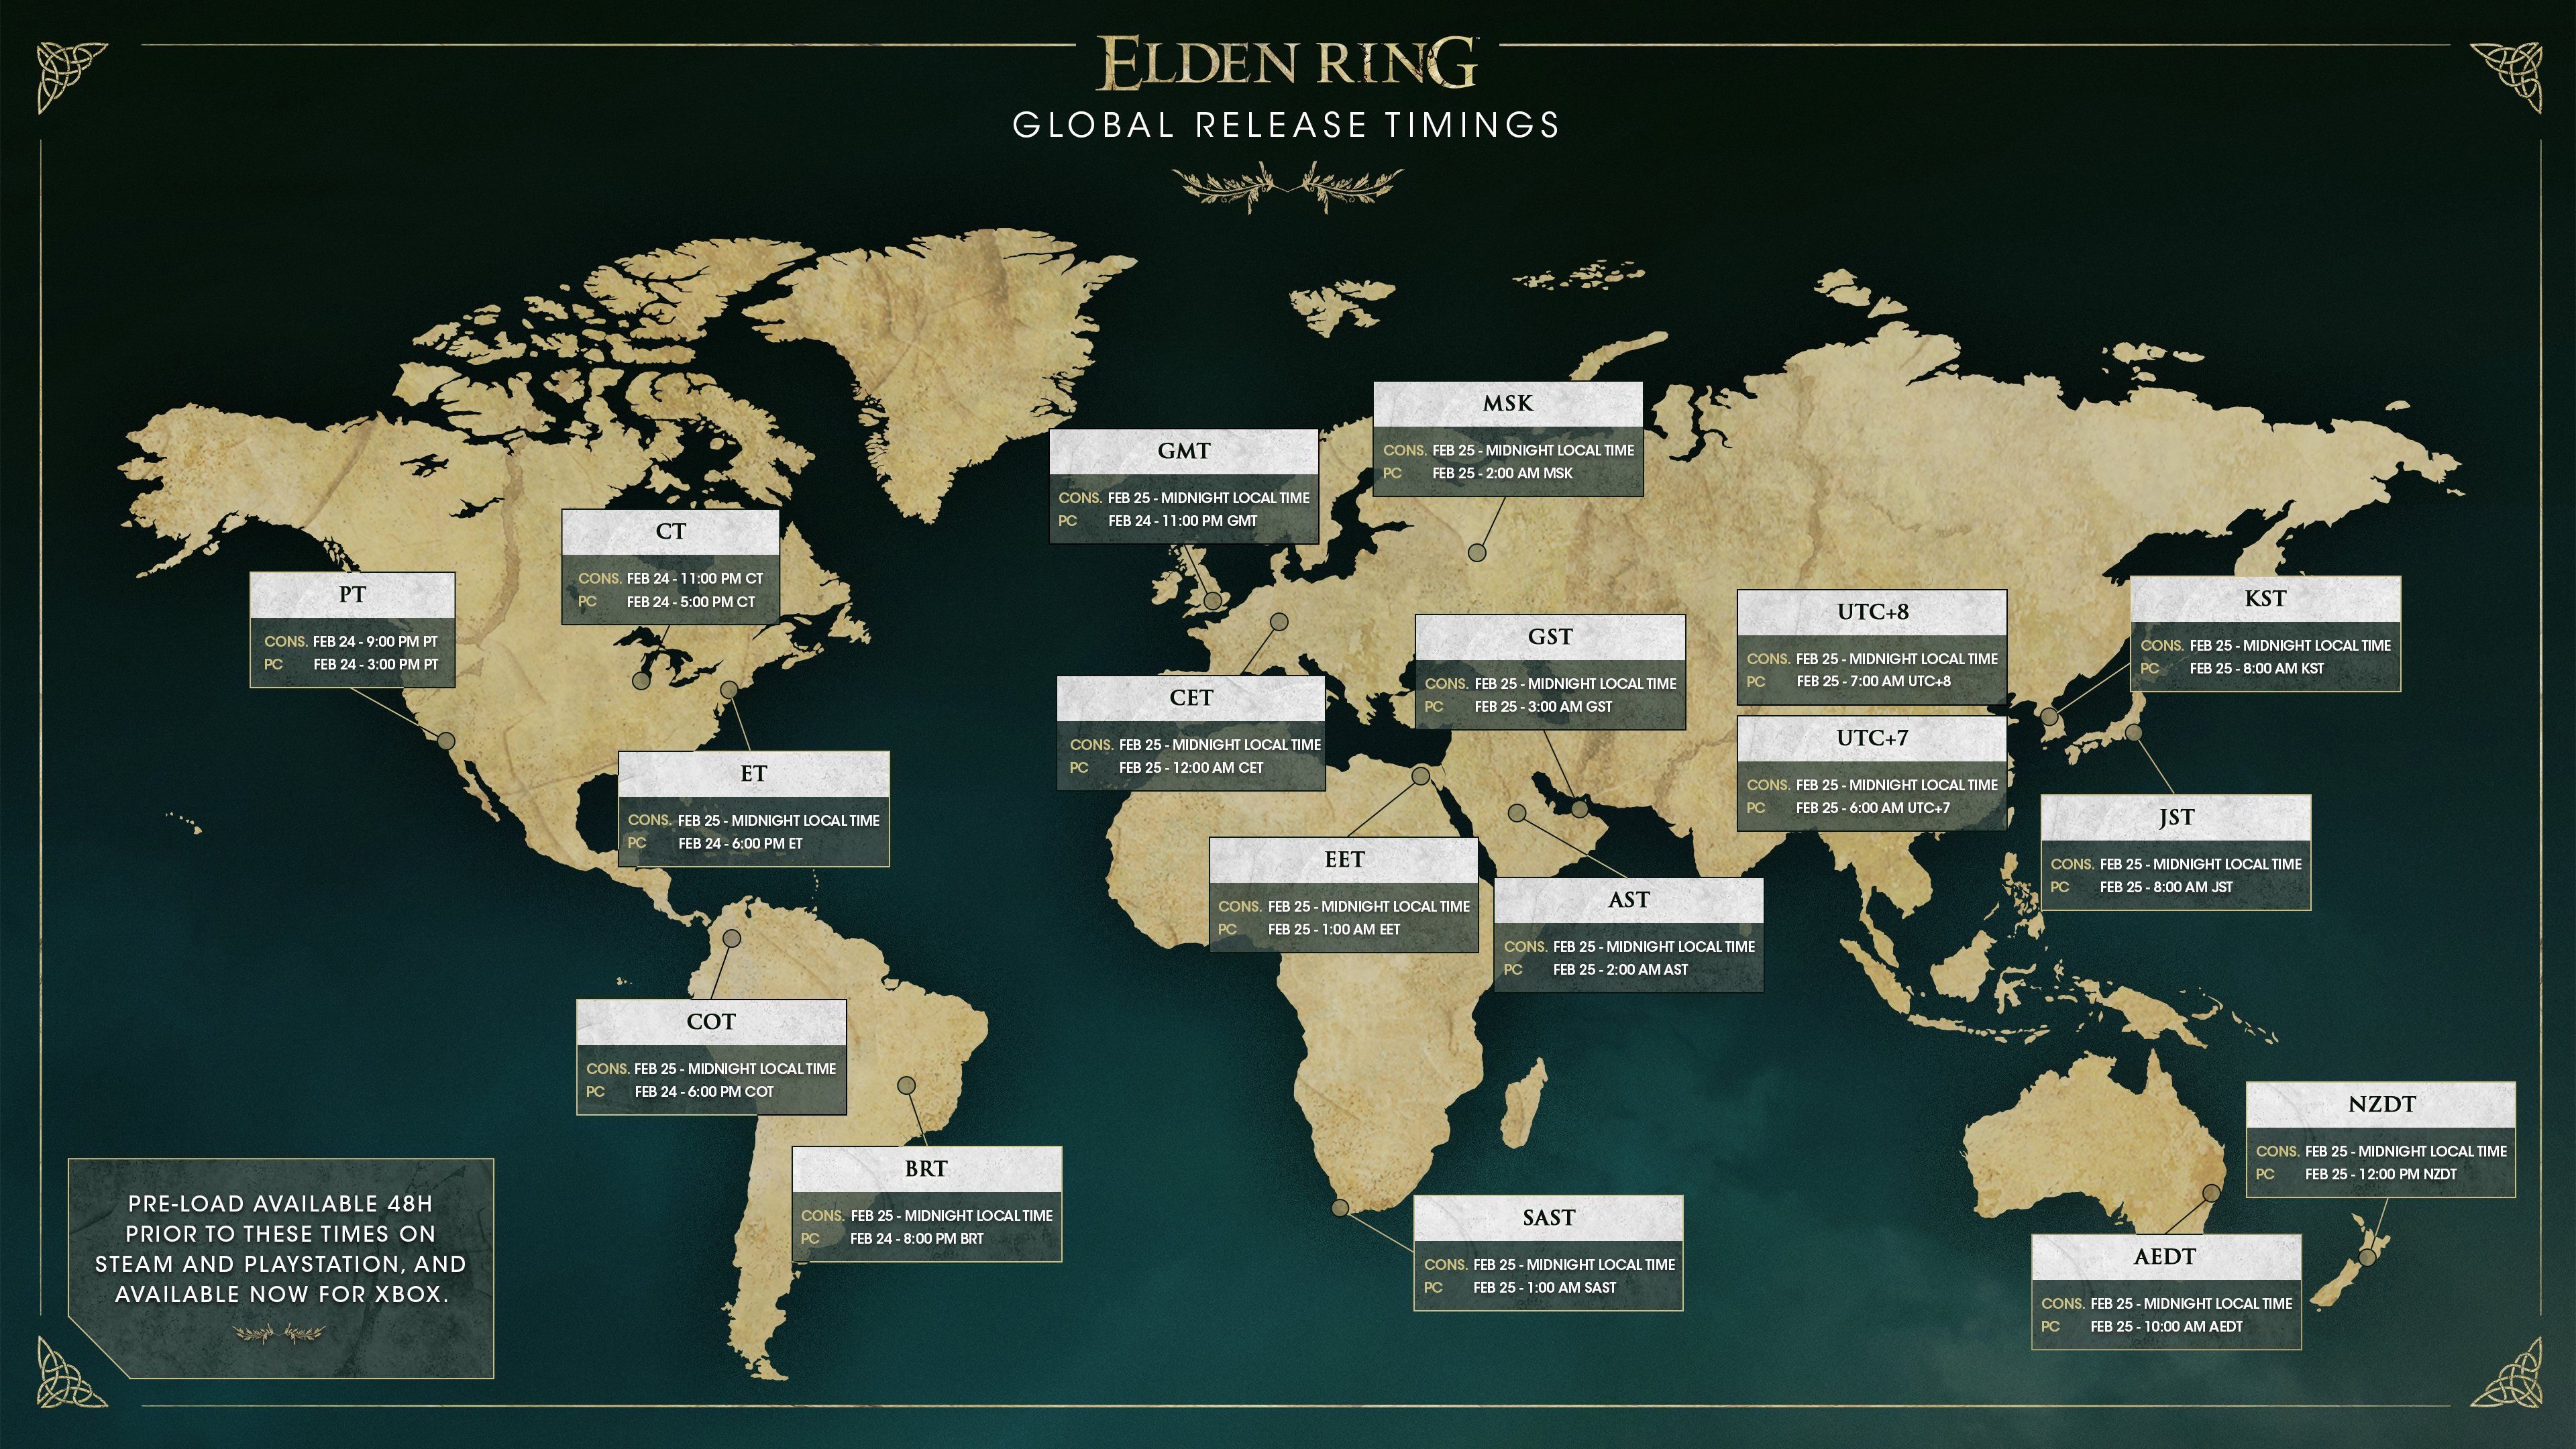 elden ring global release and launch times